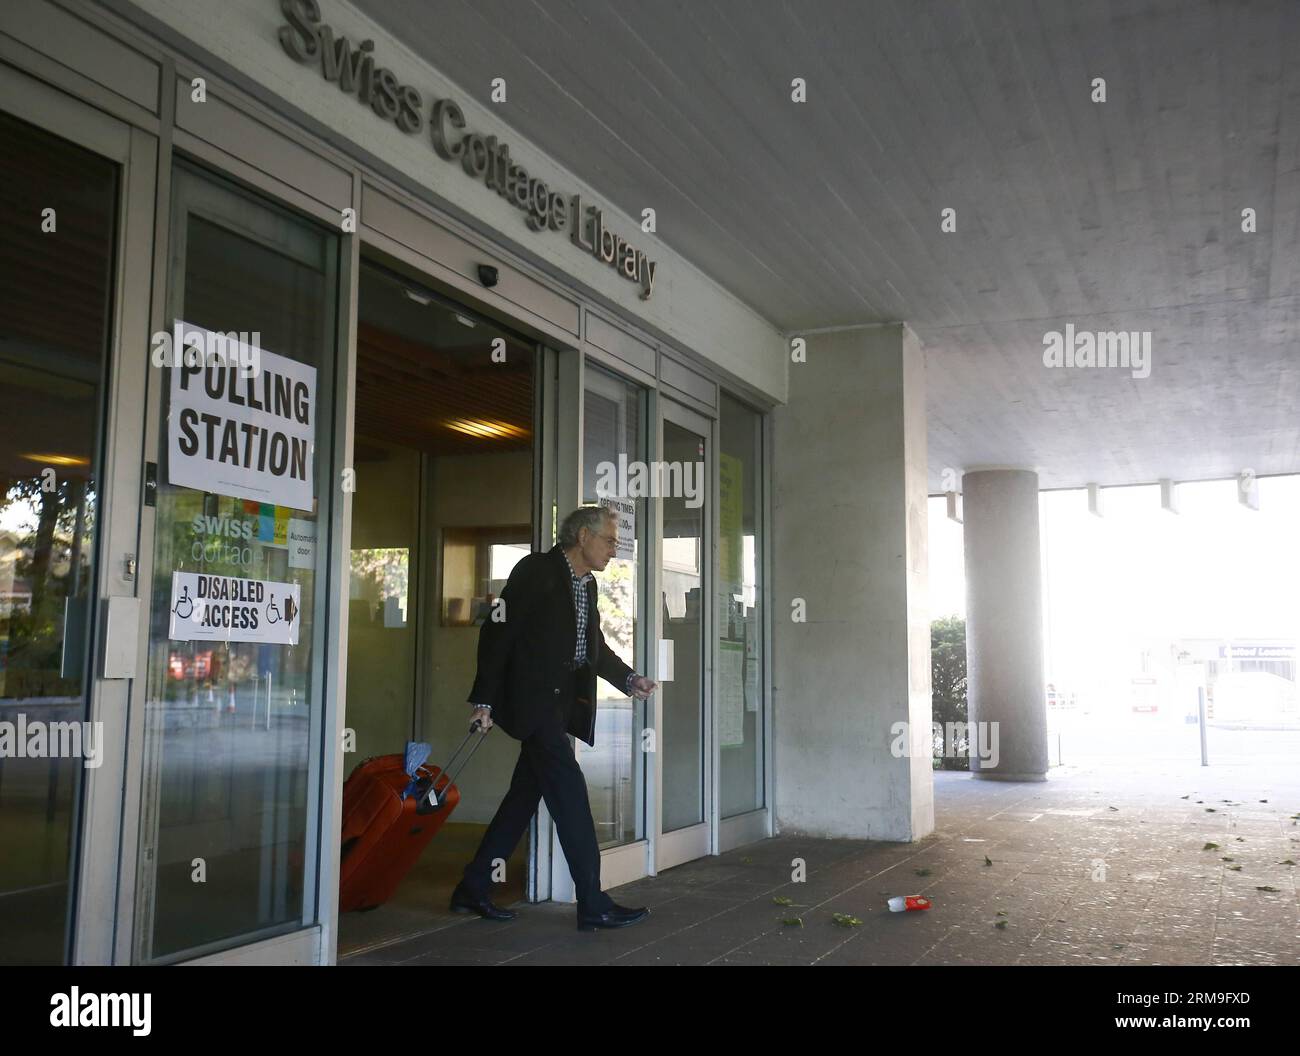 (140522) -- LONDON, May 22, 2014 (Xinhu a) -- A resident walks out of a polling station in London, Britain, May 22, 2014. European parliamentary elections kicked off on Thursday. (Xinhua/Yin Gang) BRITAIN-LONDON-EUROPEAN PARLIAMENT ELECTIONS PUBLICATIONxNOTxINxCHN   London May 22 2014 Xinhu a a Resident Walks out of a Polling Station in London Britain May 22 2014 European Parliamentary Elections kicked off ON Thursday XINHUA Yin Monitoring Britain London European Parliament Elections PUBLICATIONxNOTxINxCHN Stock Photo